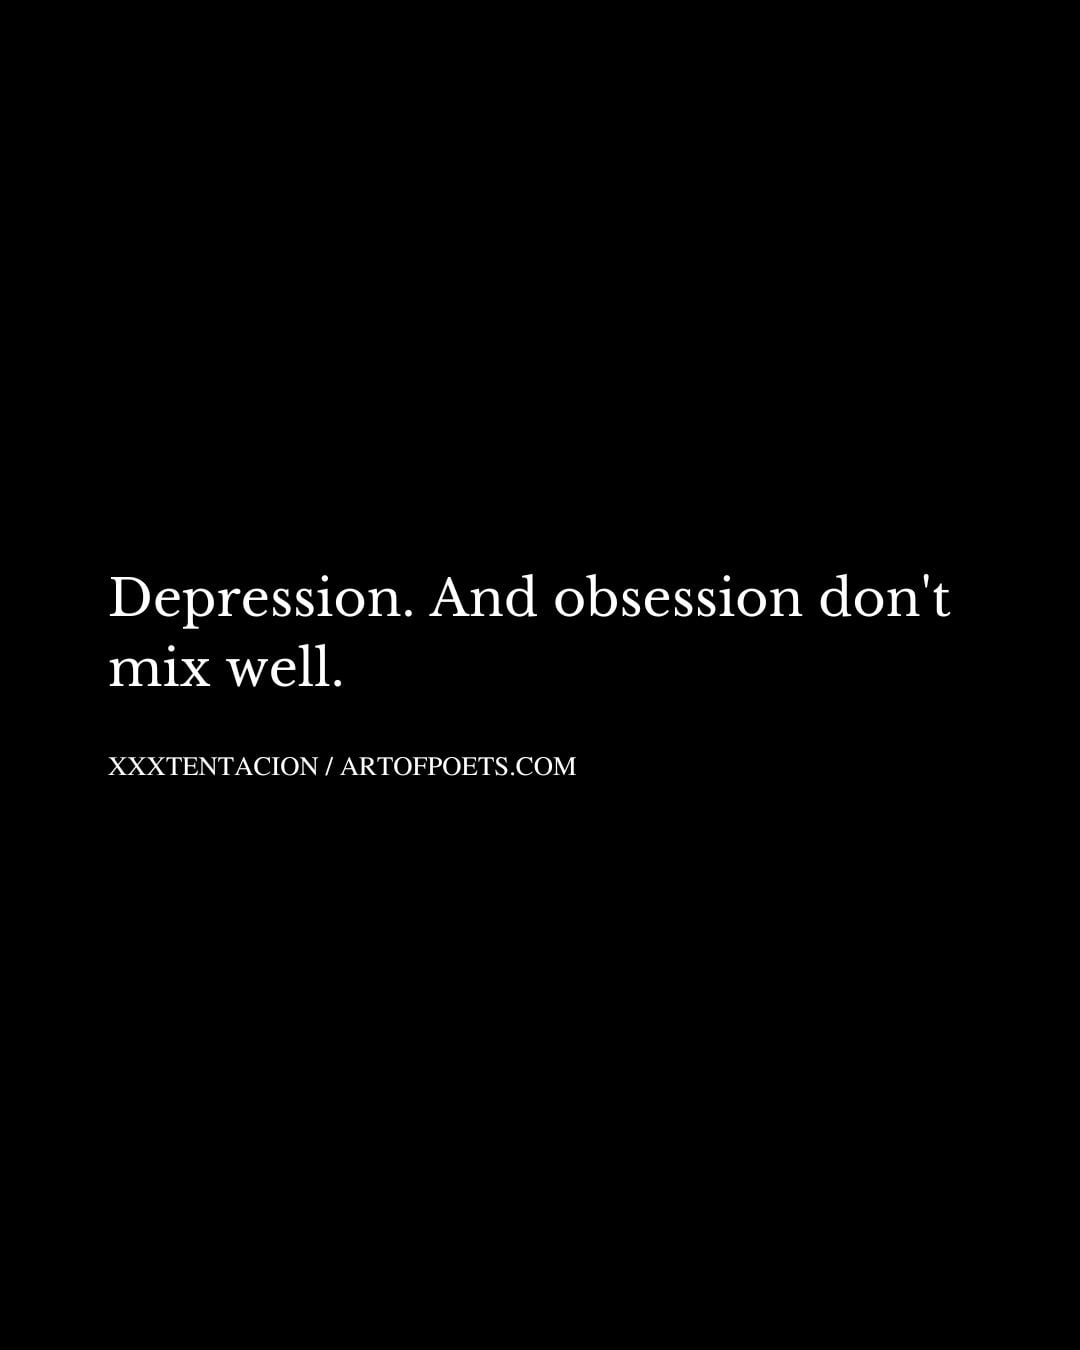 Depression. And obsession dont mix well